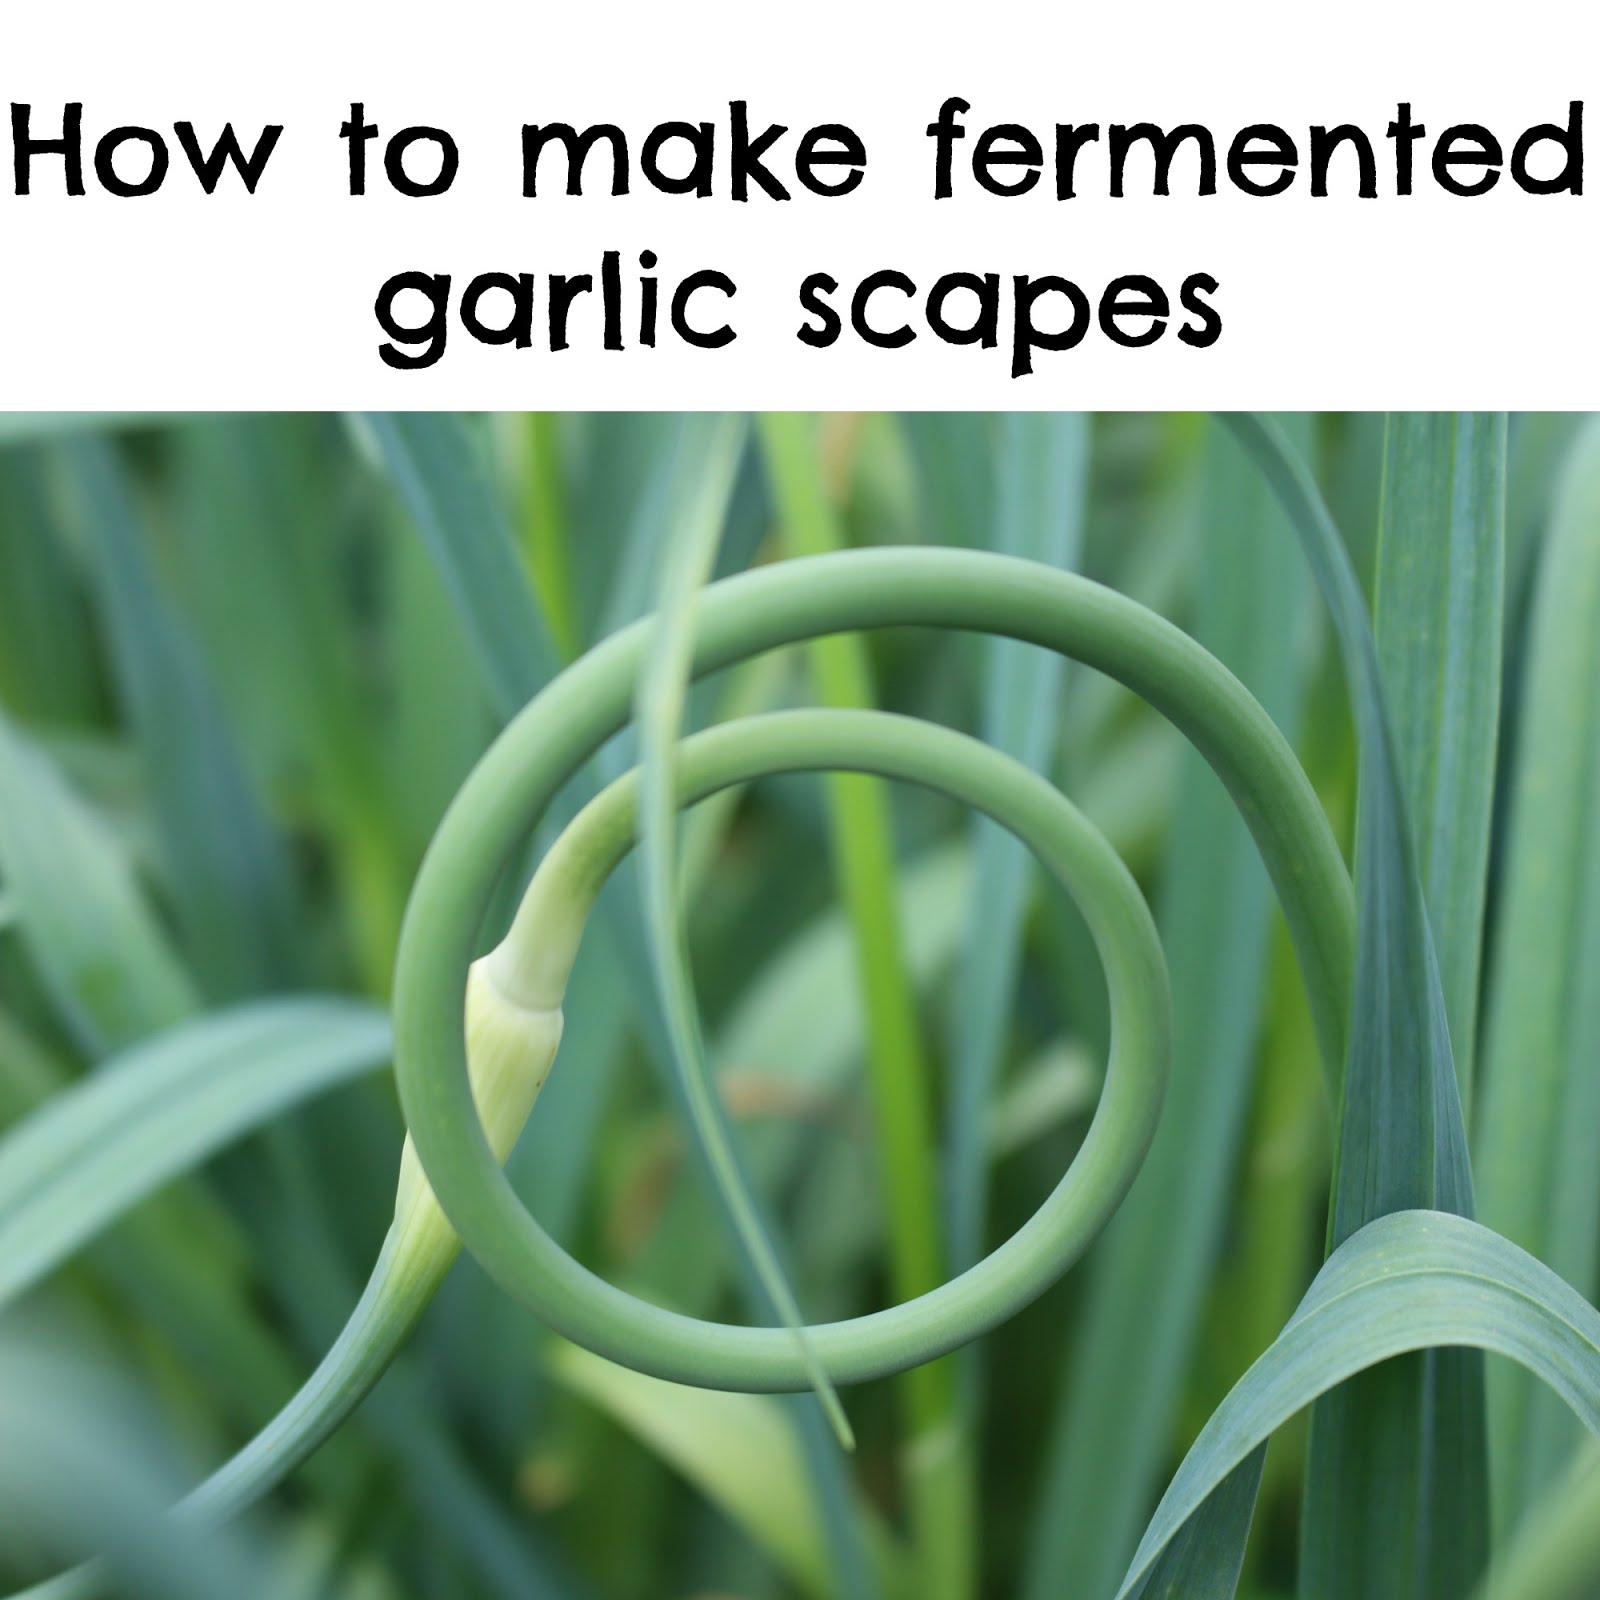 How to ferment garlic scapes